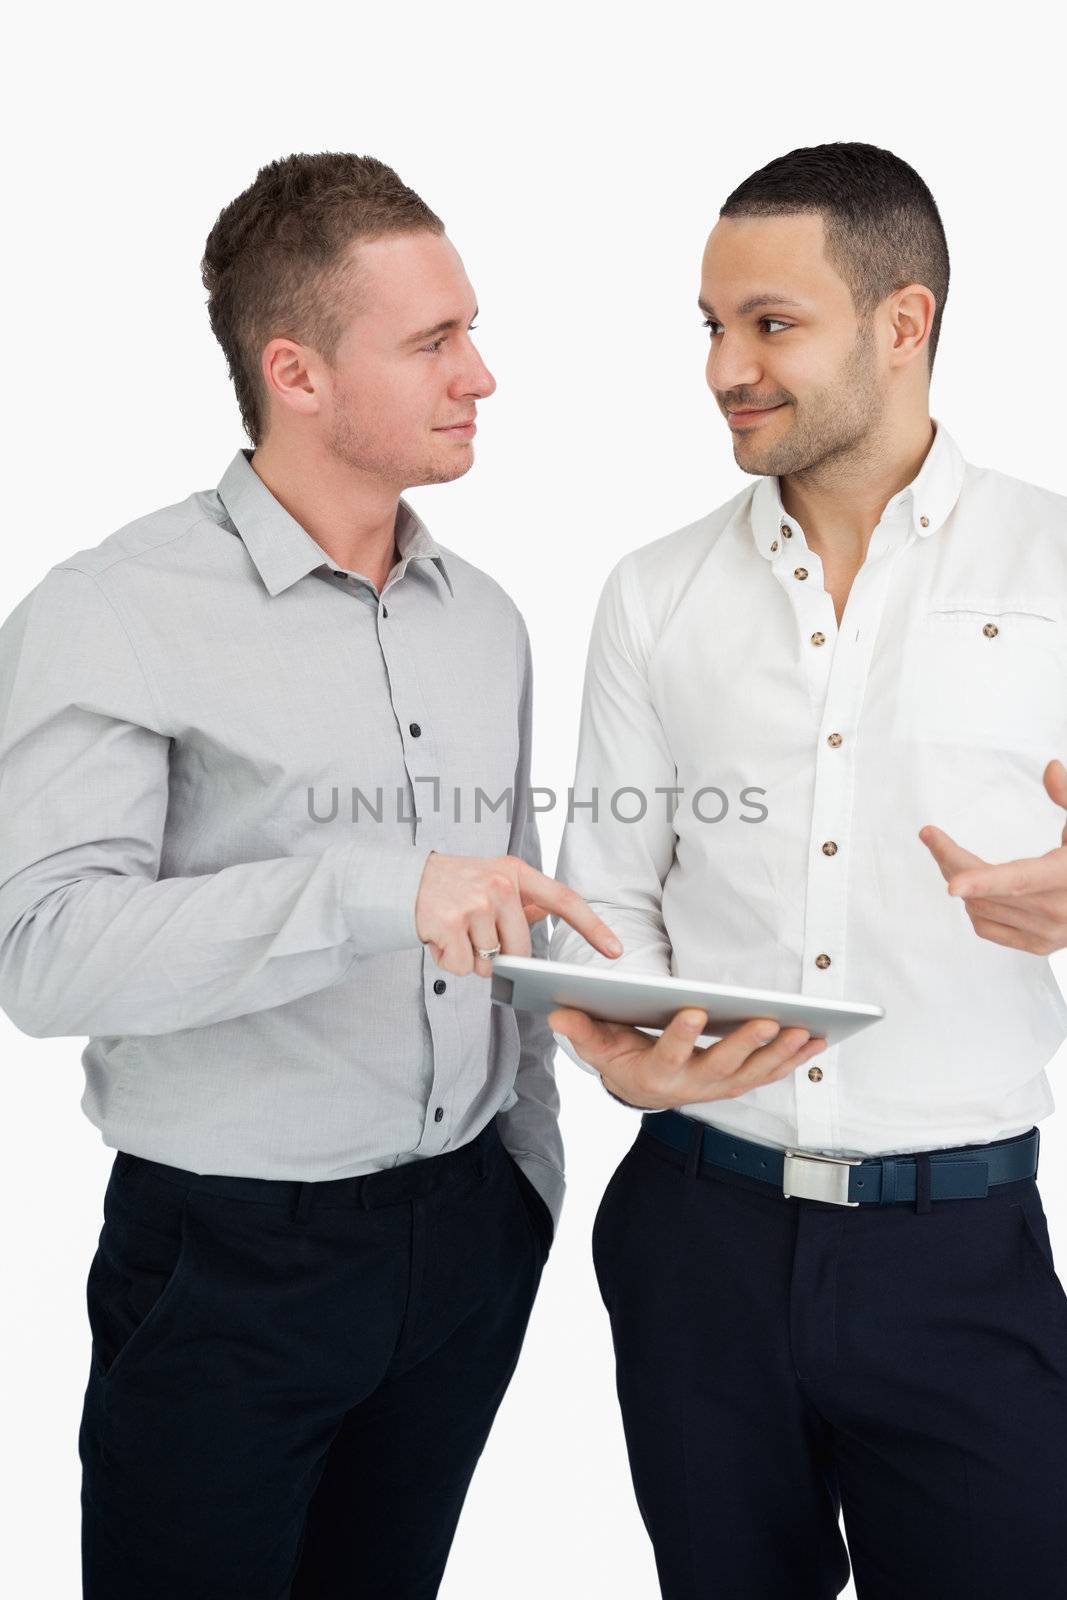 Two men together while holding a tablet computer by Wavebreakmedia